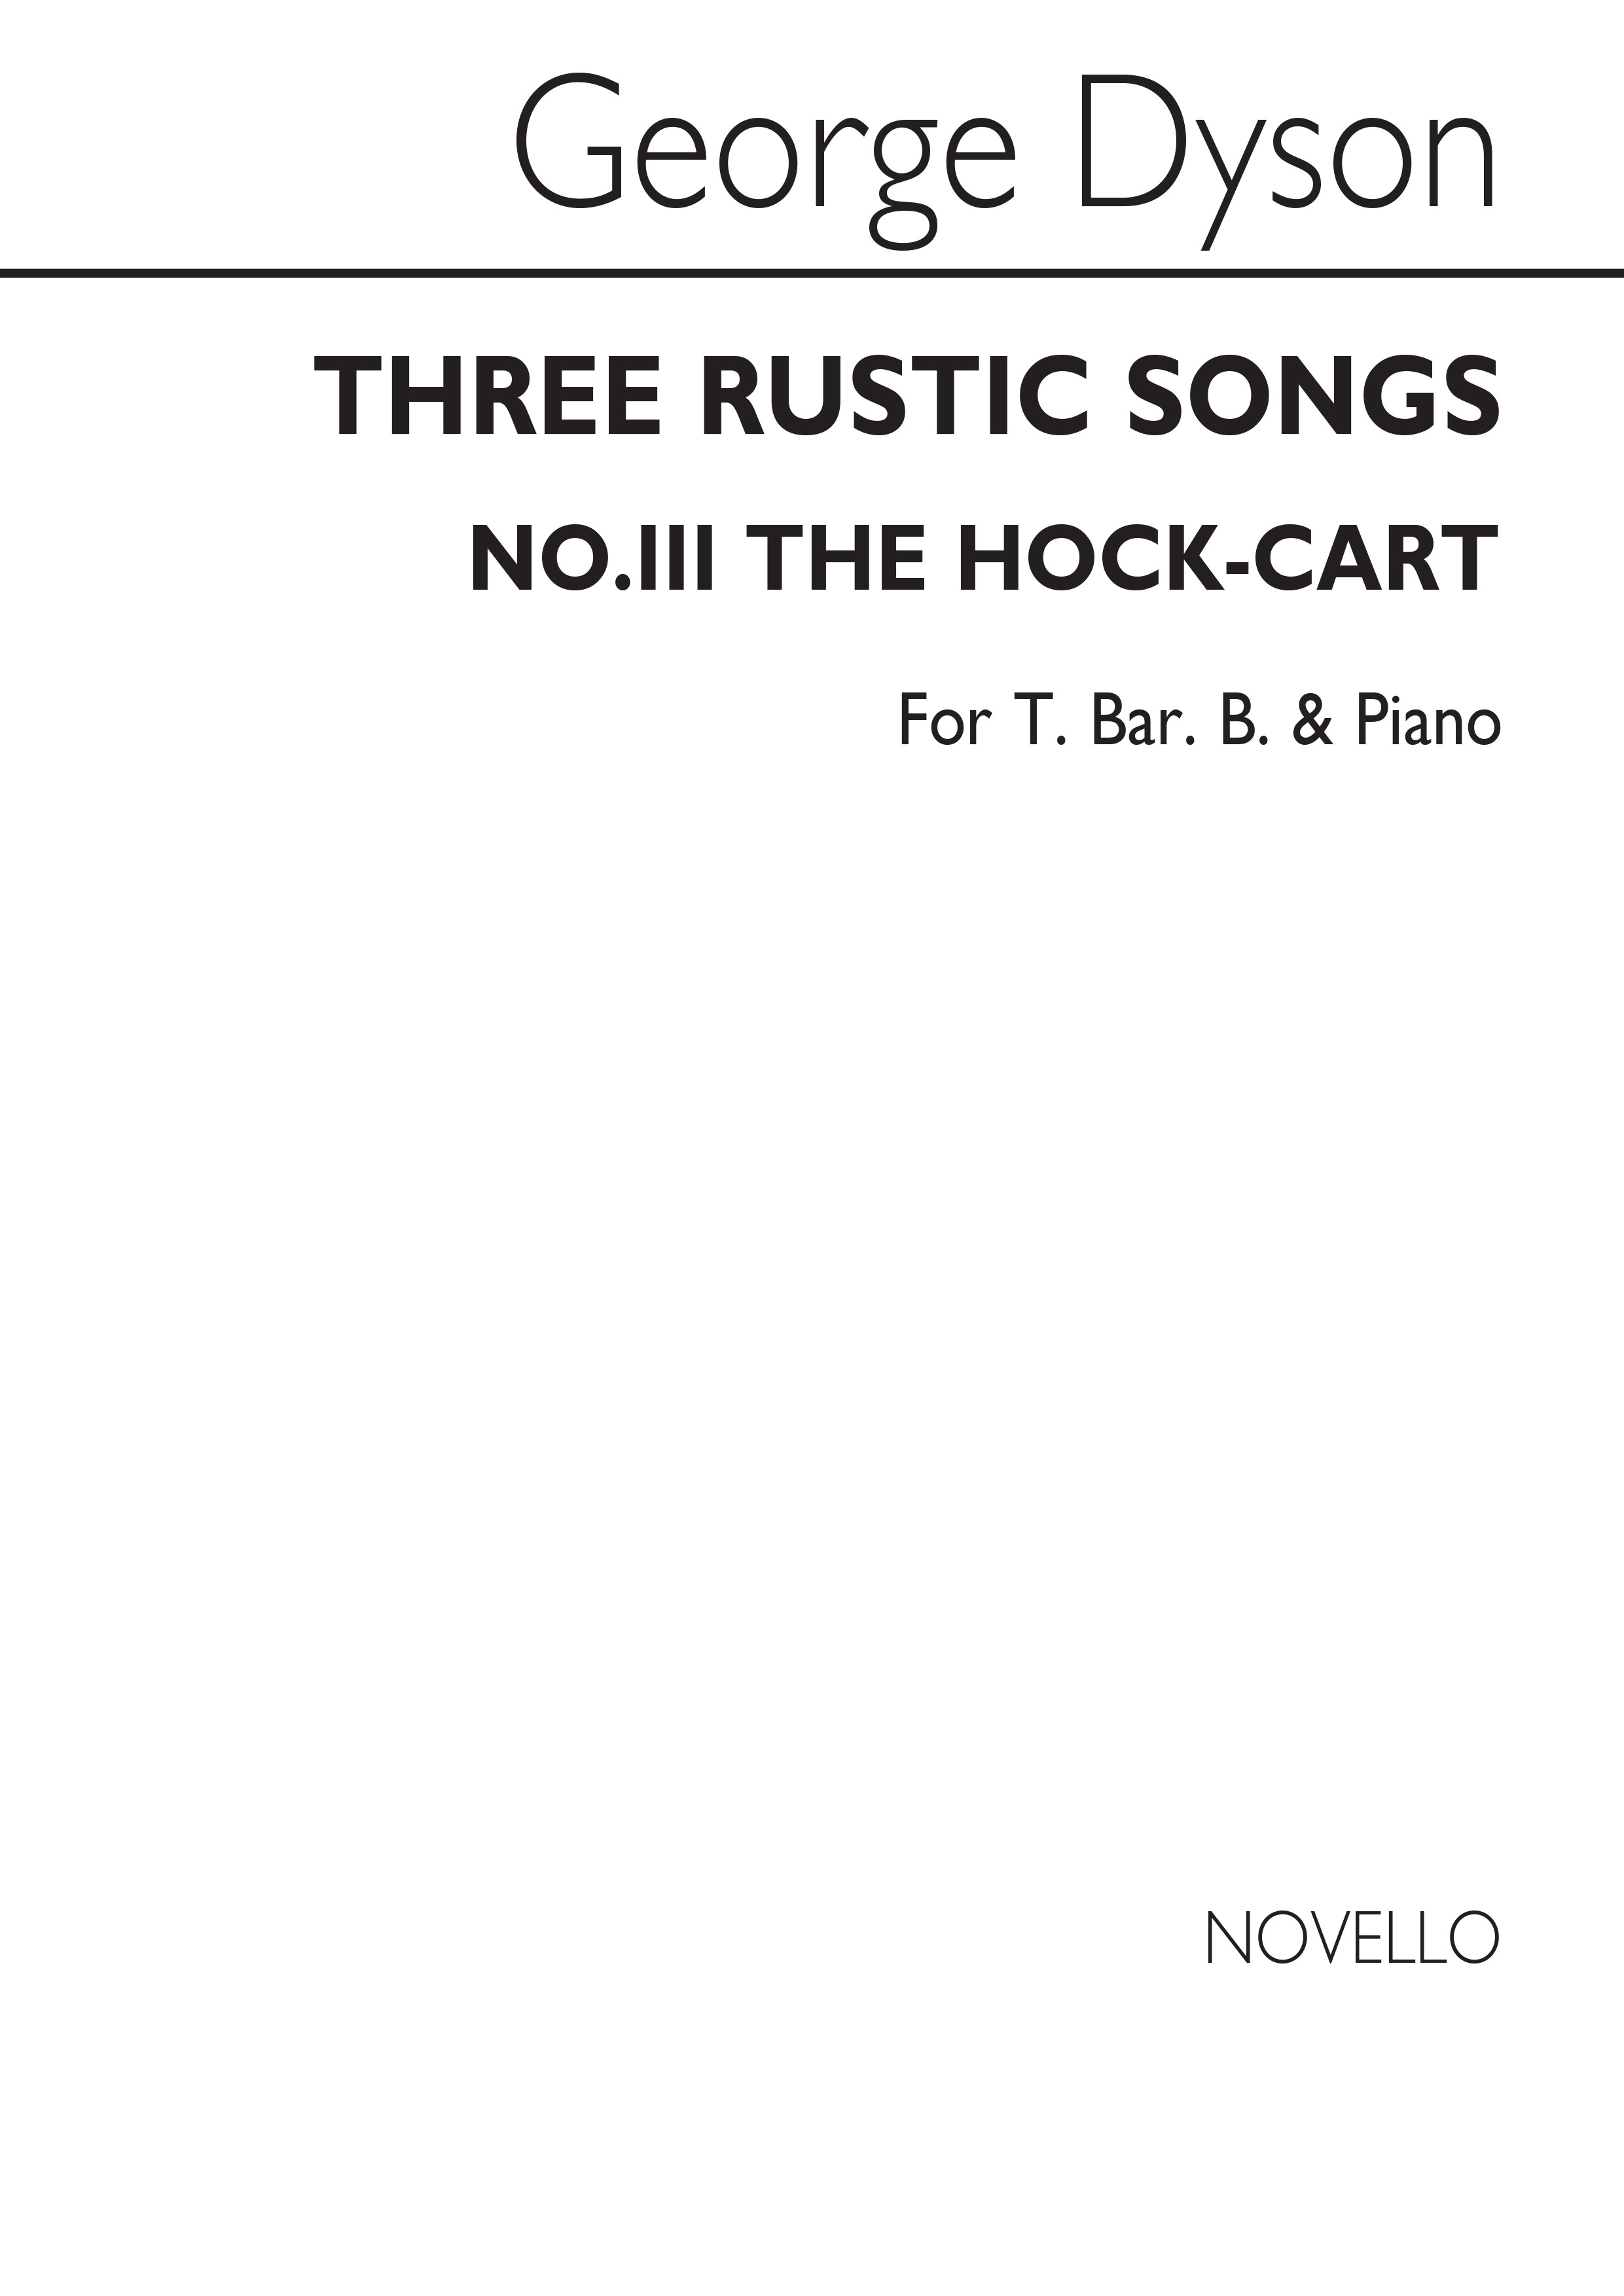 Dyson The Hock-cart T/Bar/B+piano No3 From Three Rustic Songs